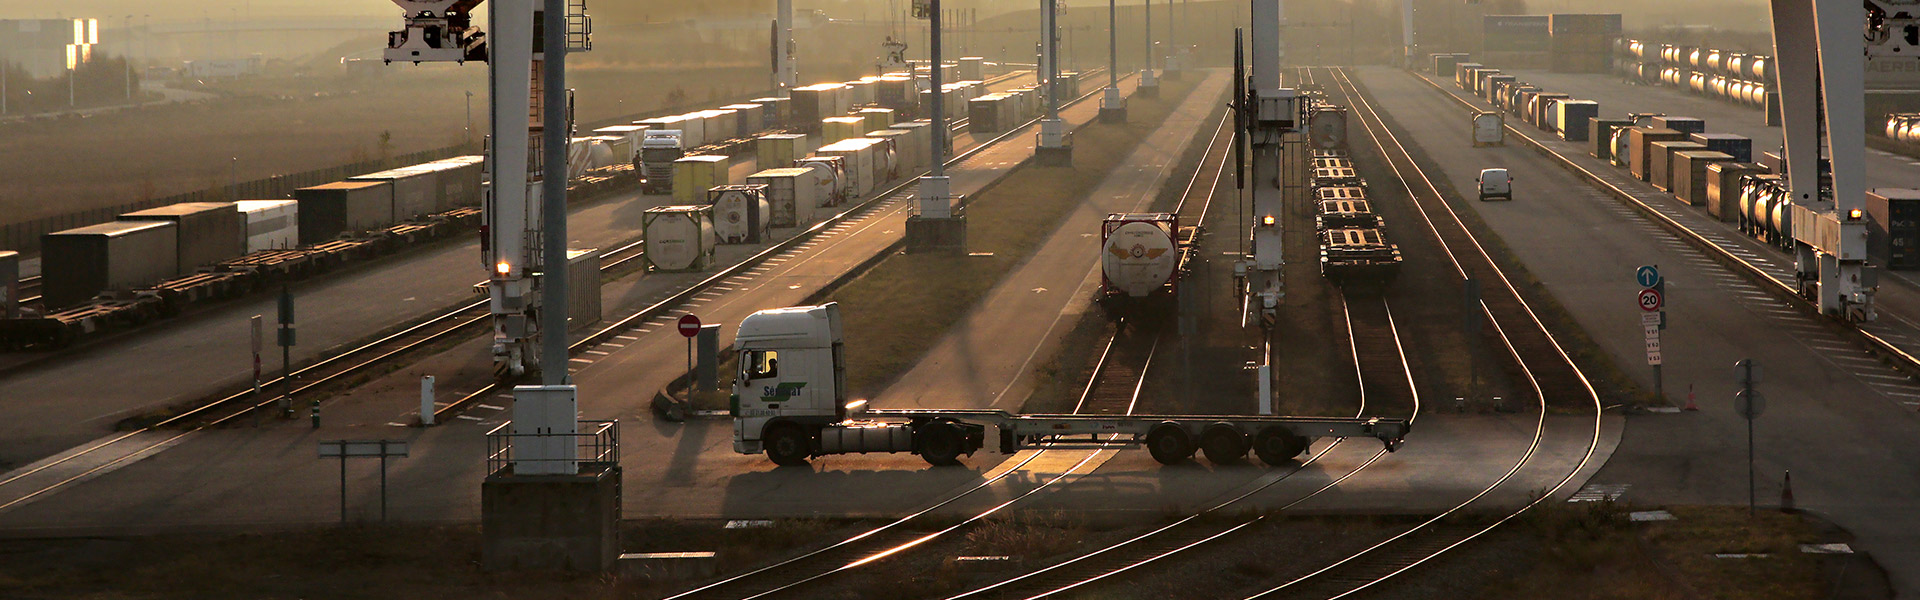 Our intermodal expertise at your service Image 1